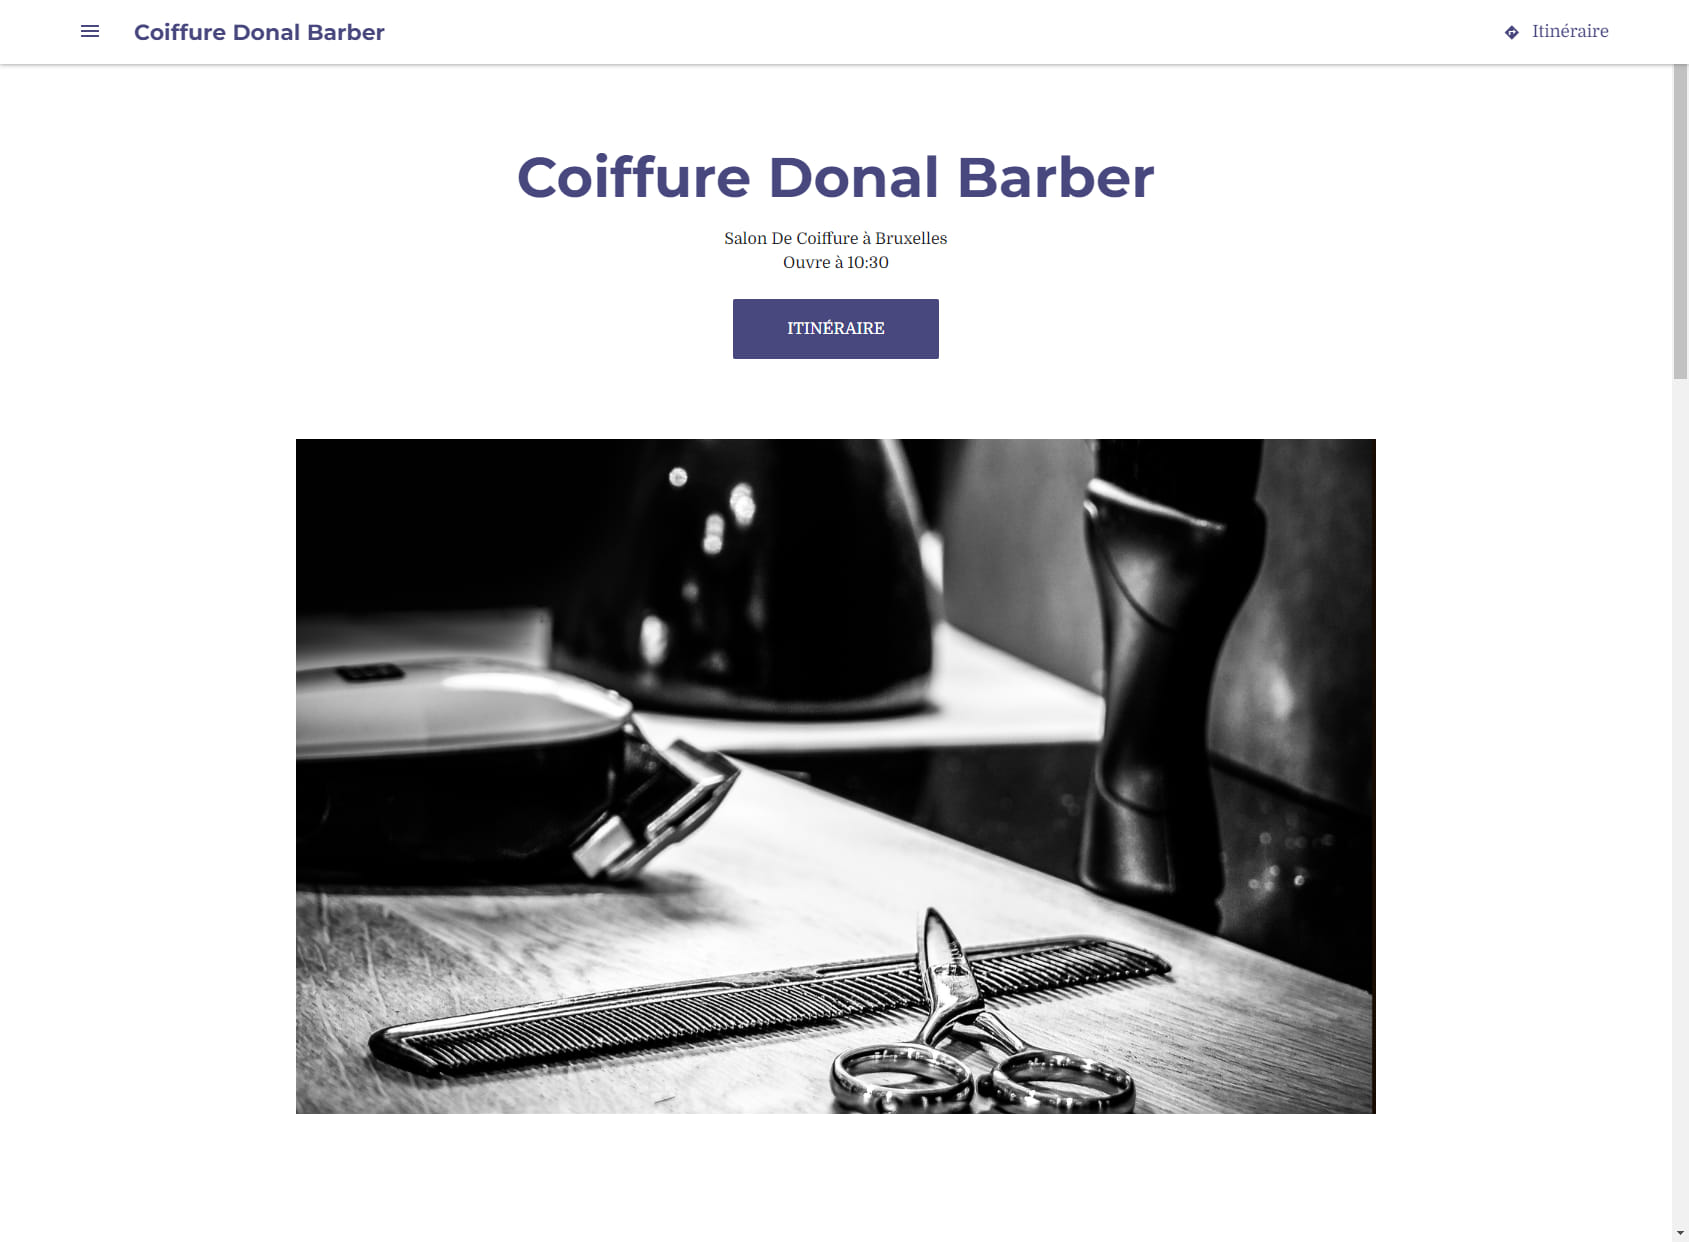 Coiffure Donal Barber